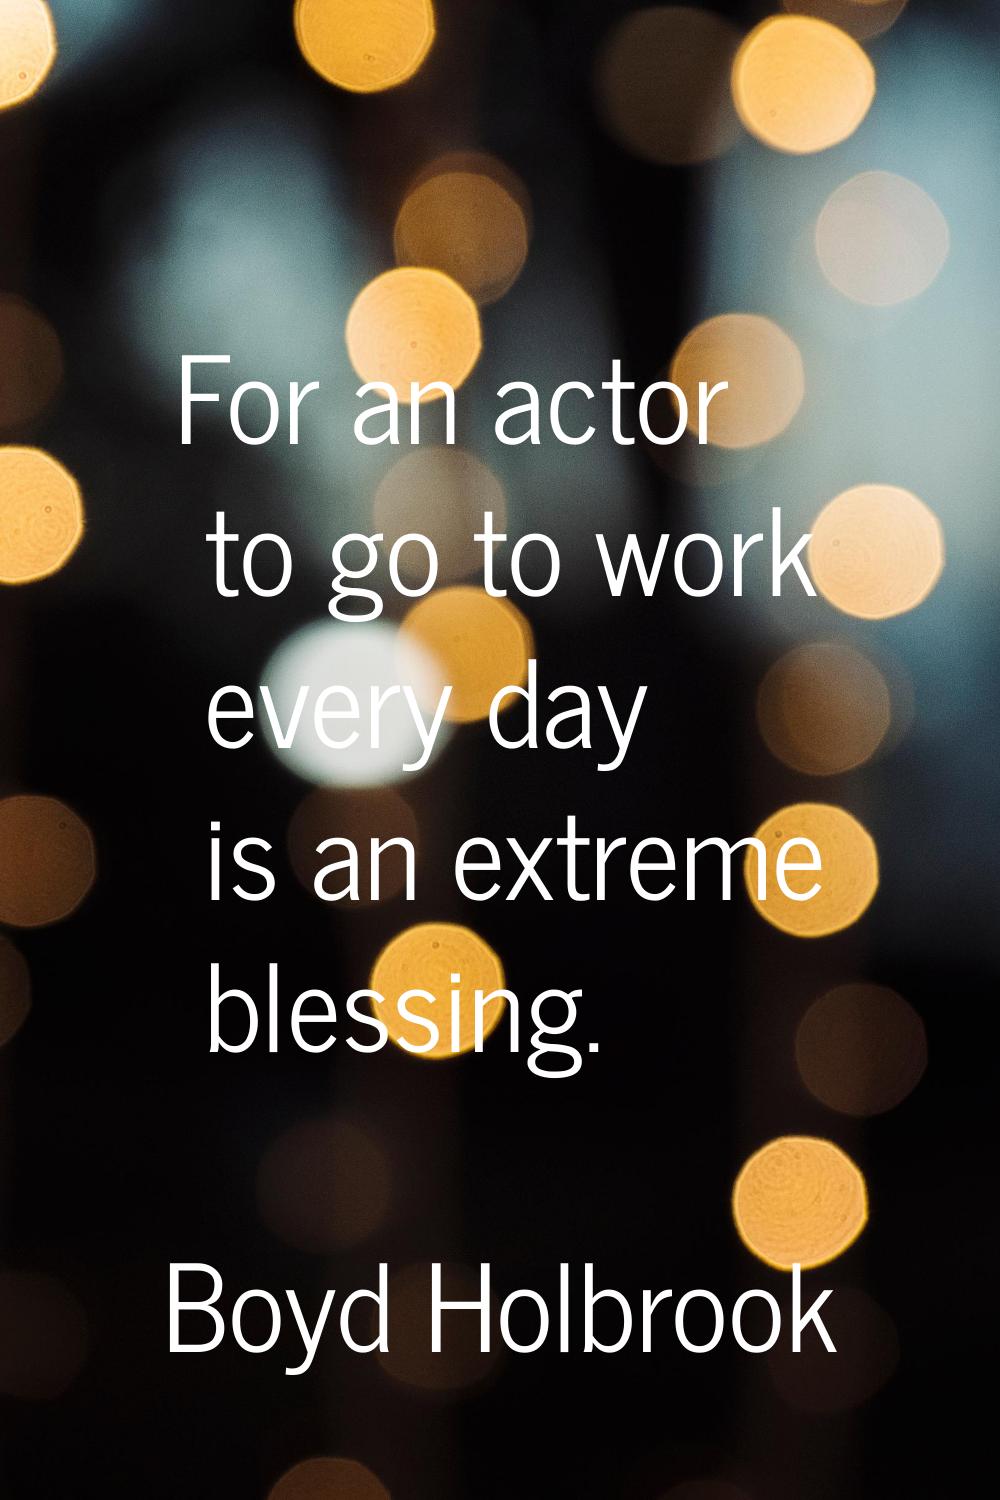 For an actor to go to work every day is an extreme blessing.